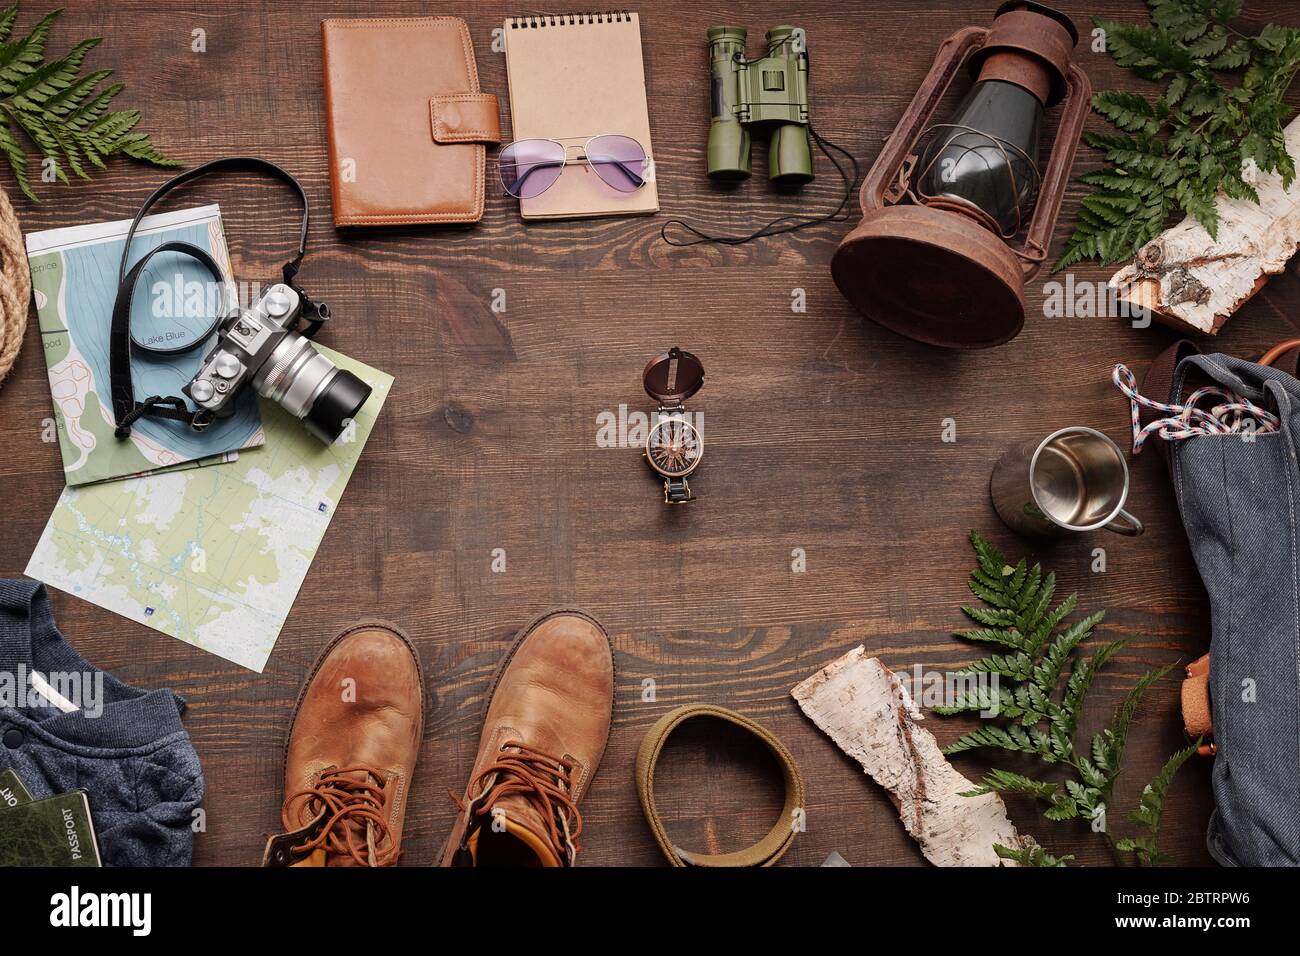 Above view of navigational compass among travelers stuff such as lantern, camera, thermos mug and boots on wooden table Stock Photo